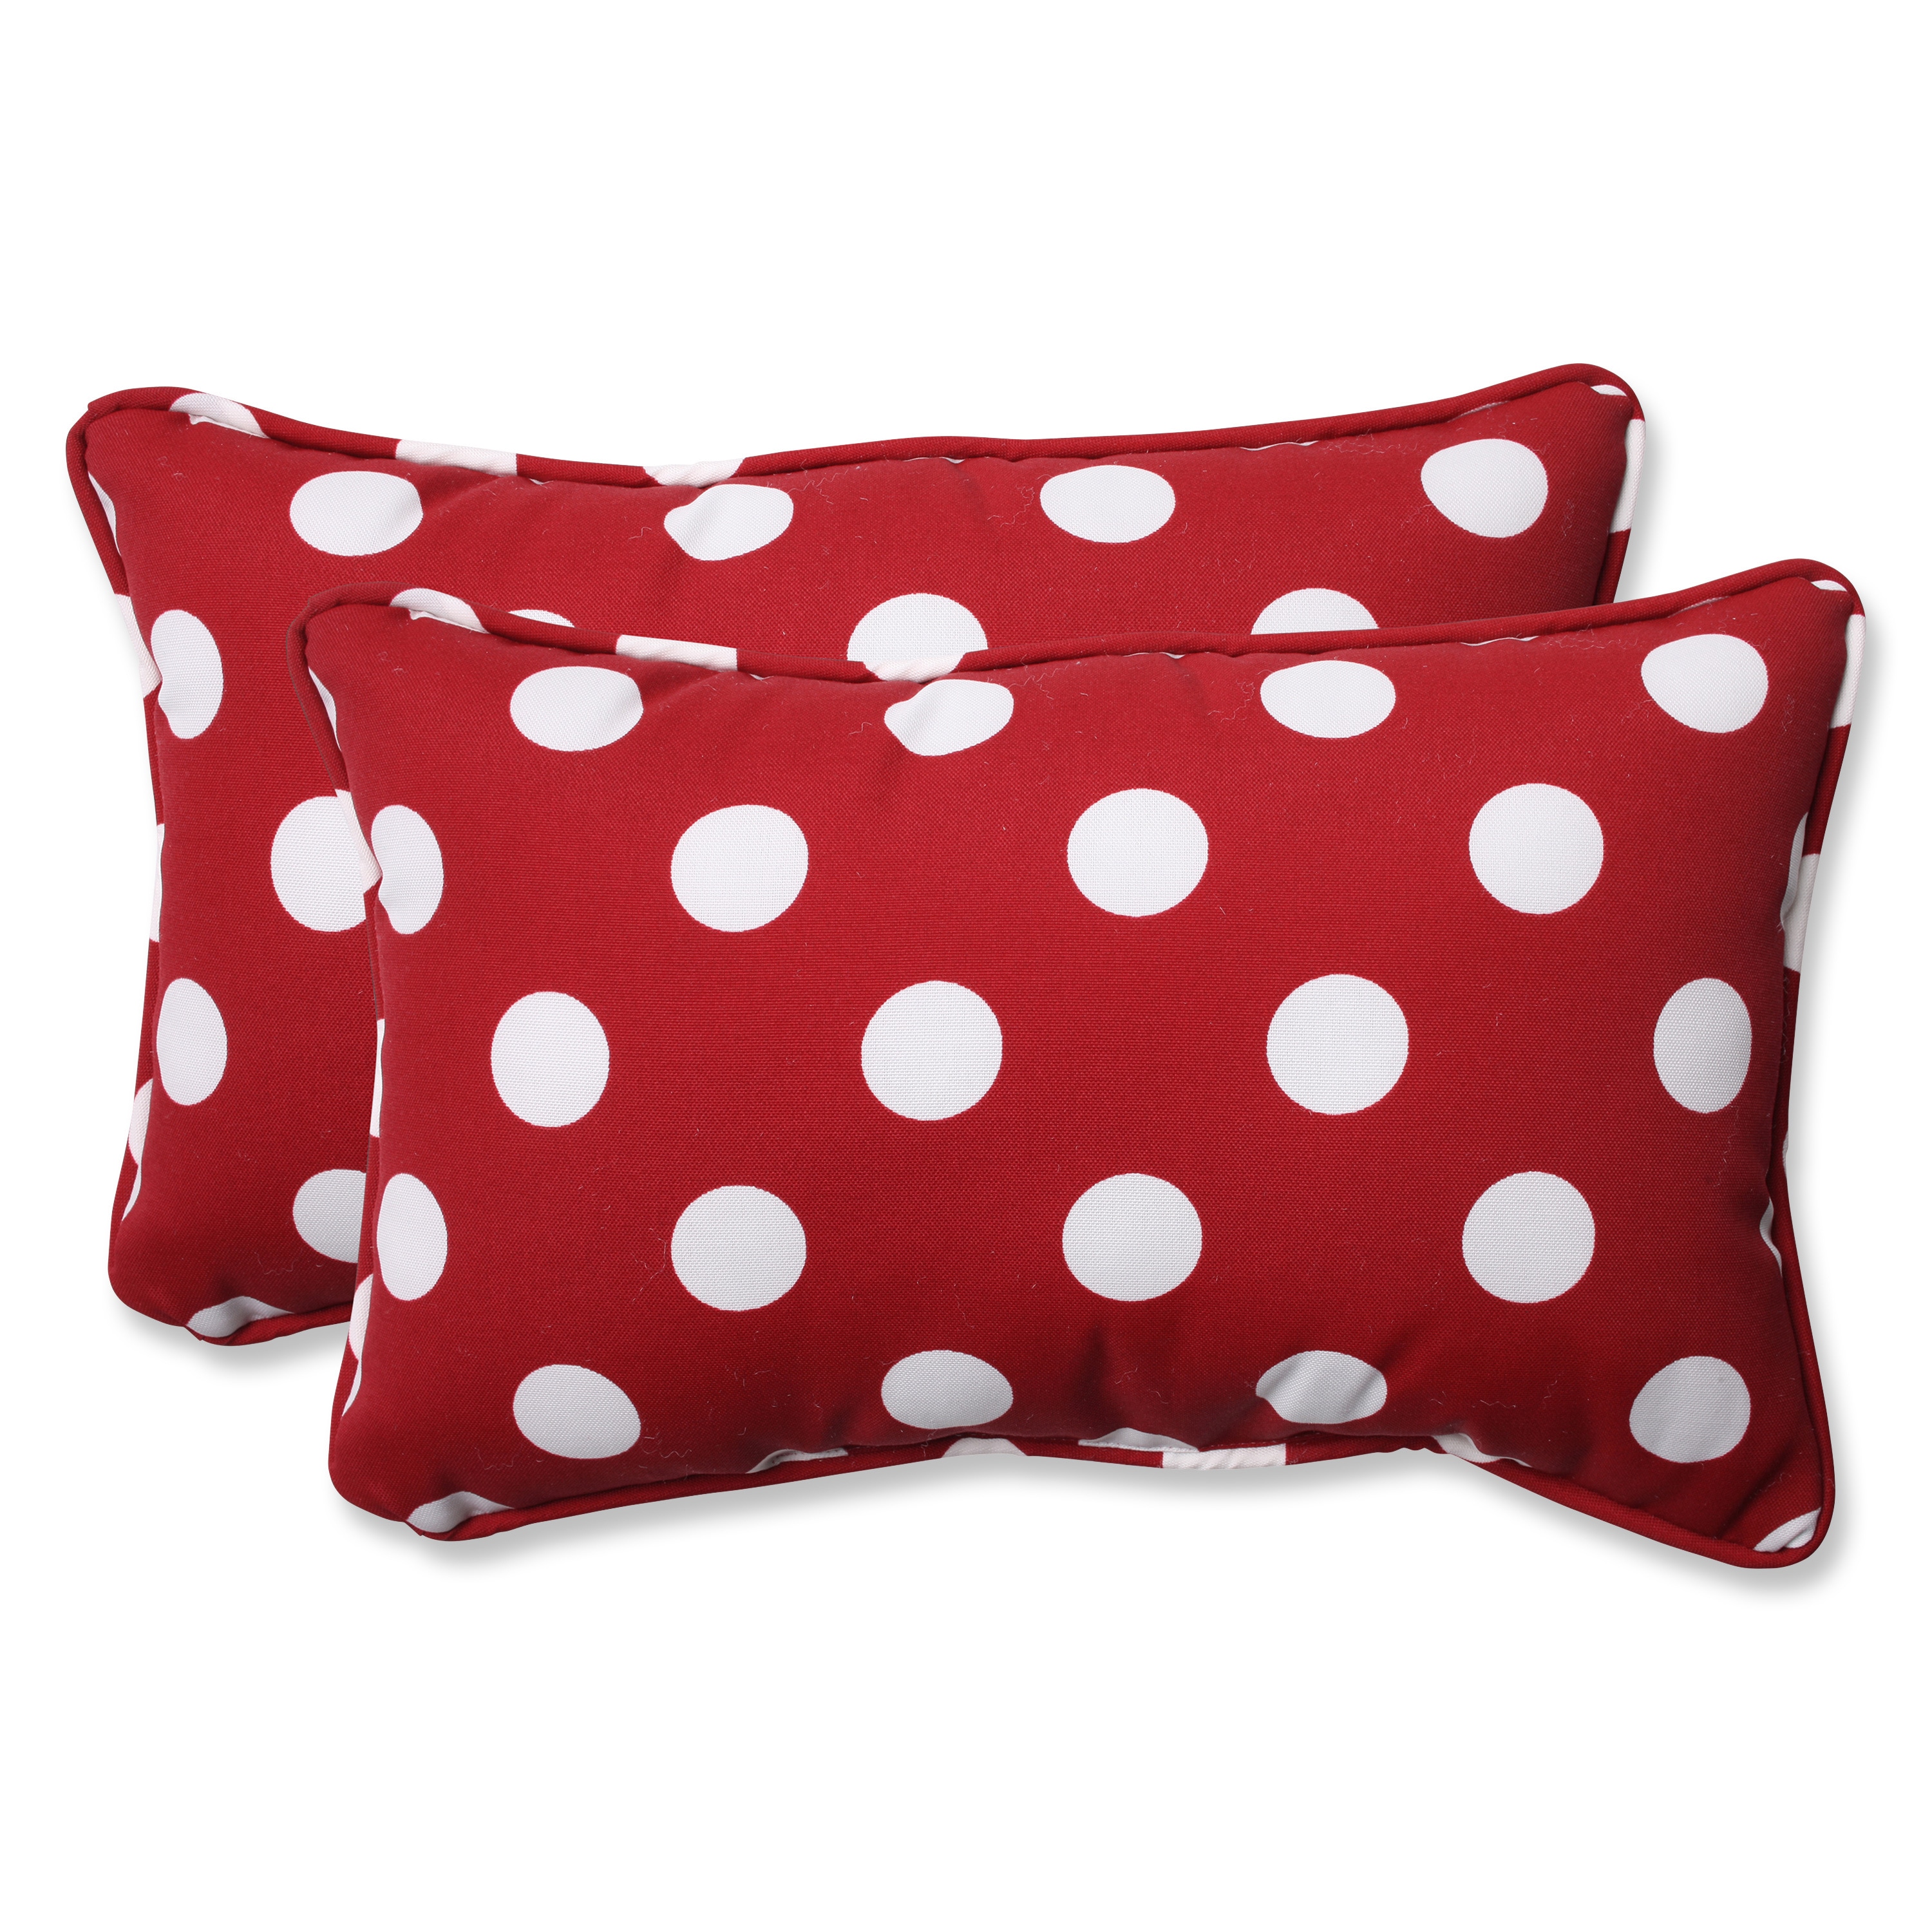 https://ak1.ostkcdn.com/images/products/6308724/Pillow-Perfect-Weather-Resistant-Decorative-Red-White-Polka-Dot-Outdoor-Toss-Pillows-Set-of-2-d97fb732-8344-40af-8514-b218f8591e31.jpg